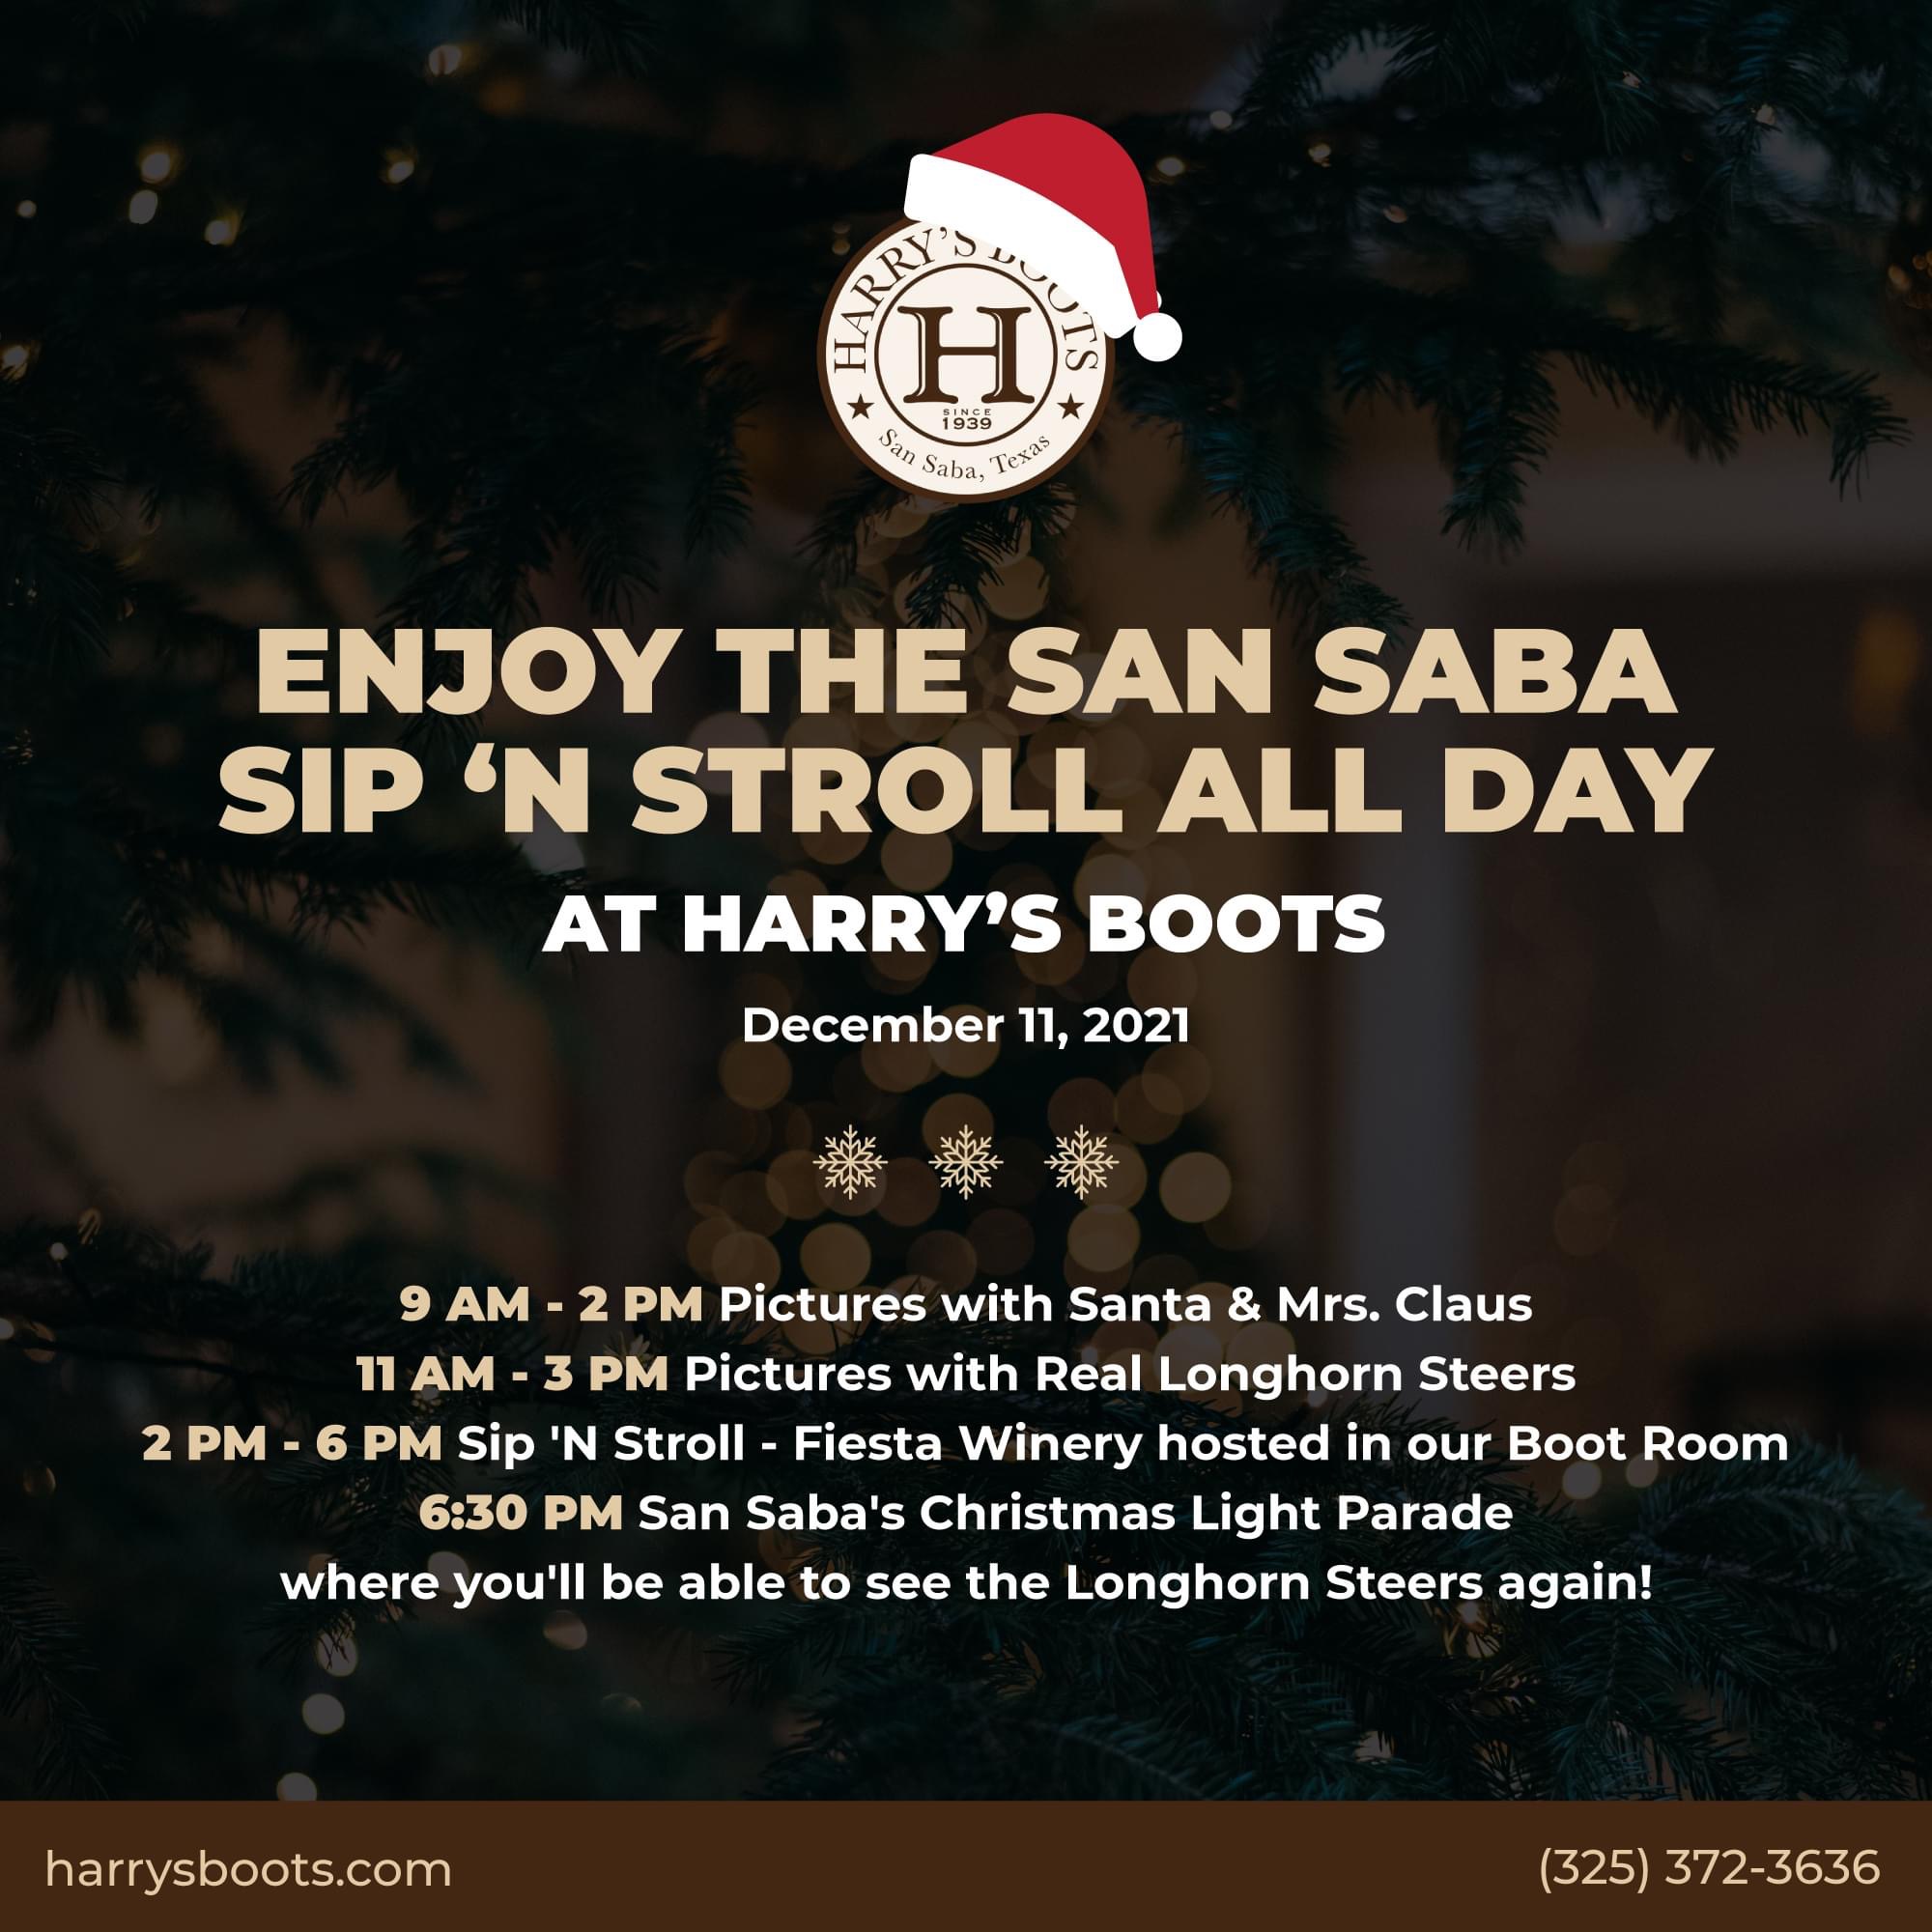 Enjoy the San Saba Sip N' Stroll All Day at Harry's Boots